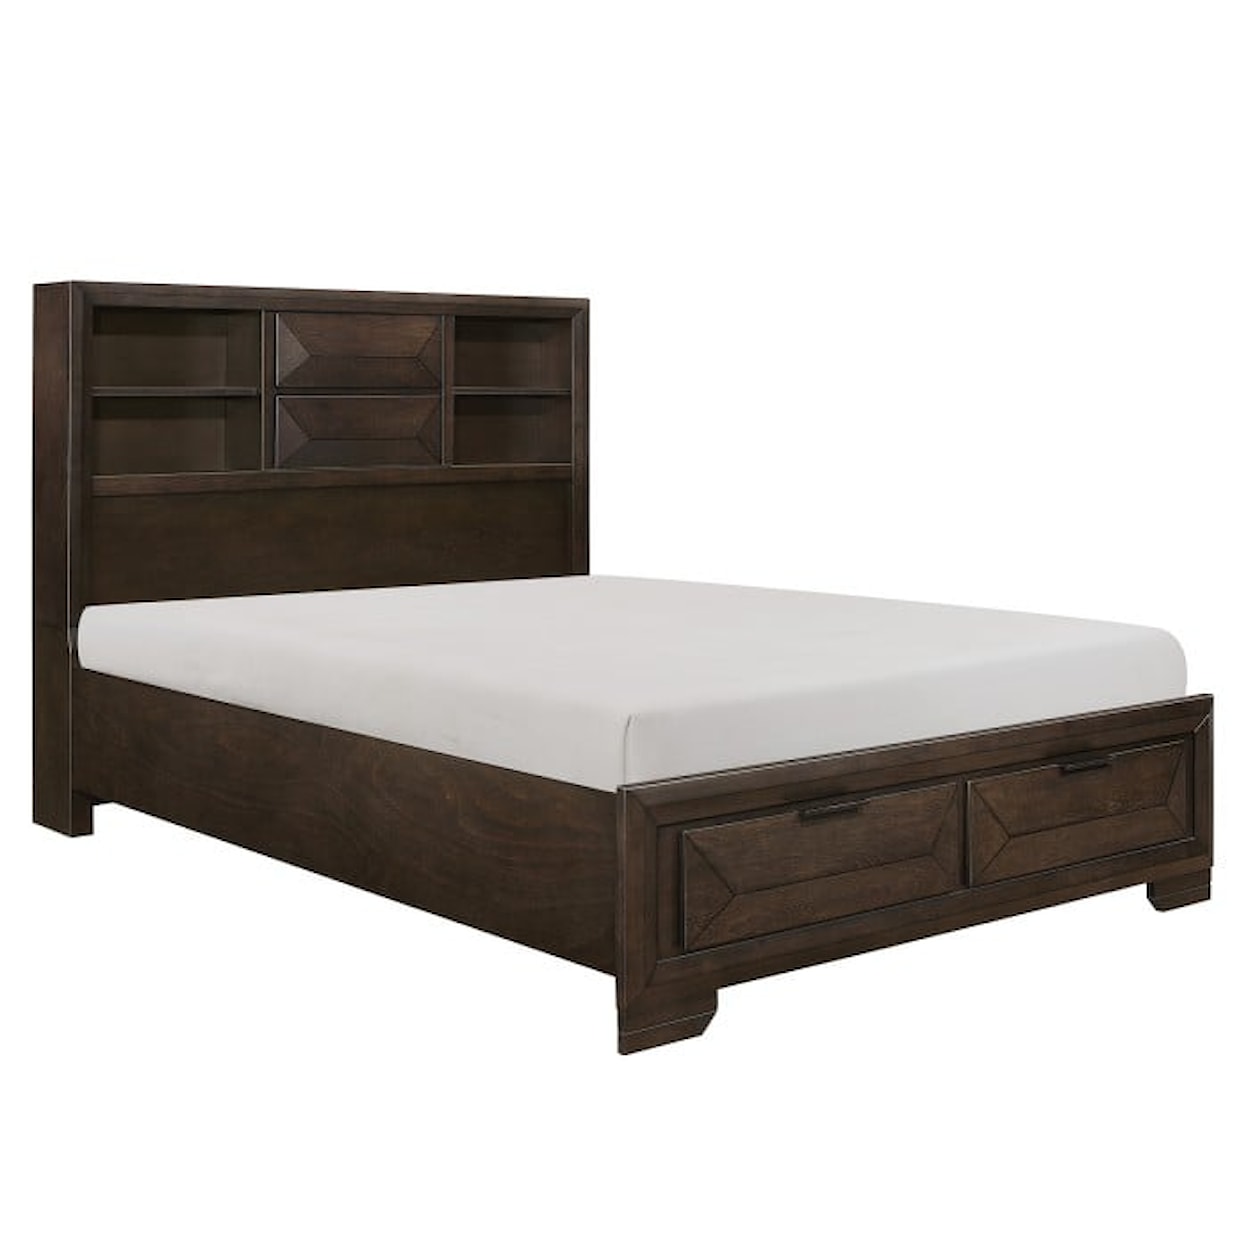 Homelegance Furniture Chesky Queen Platform Bed with Footboard Storage